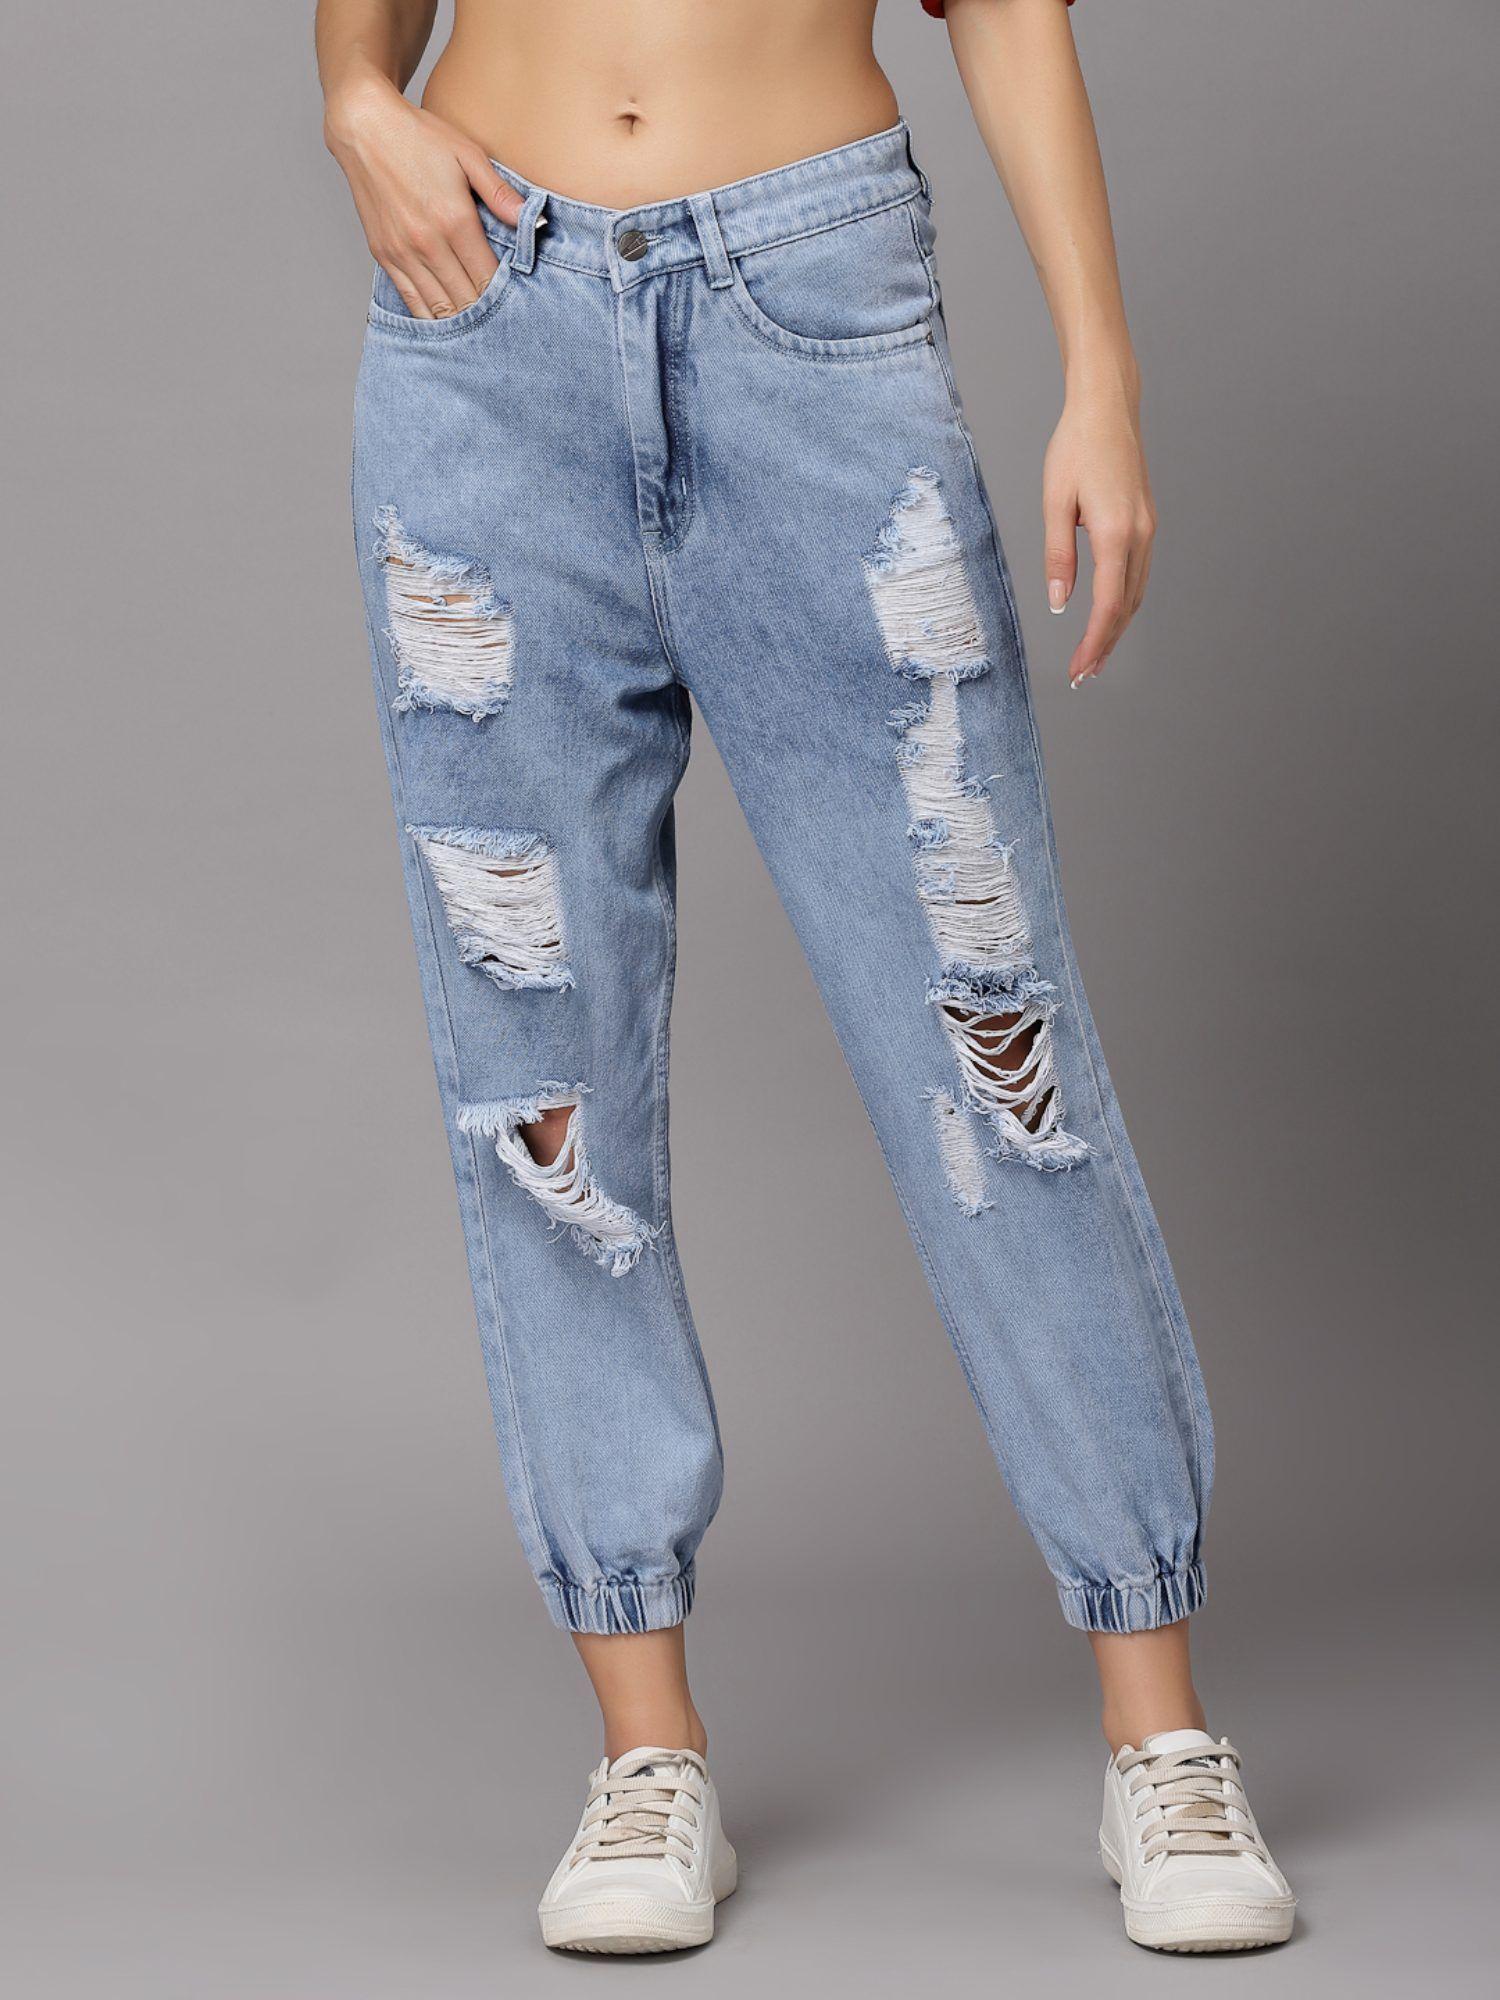 blue highly distressed light fade jeans